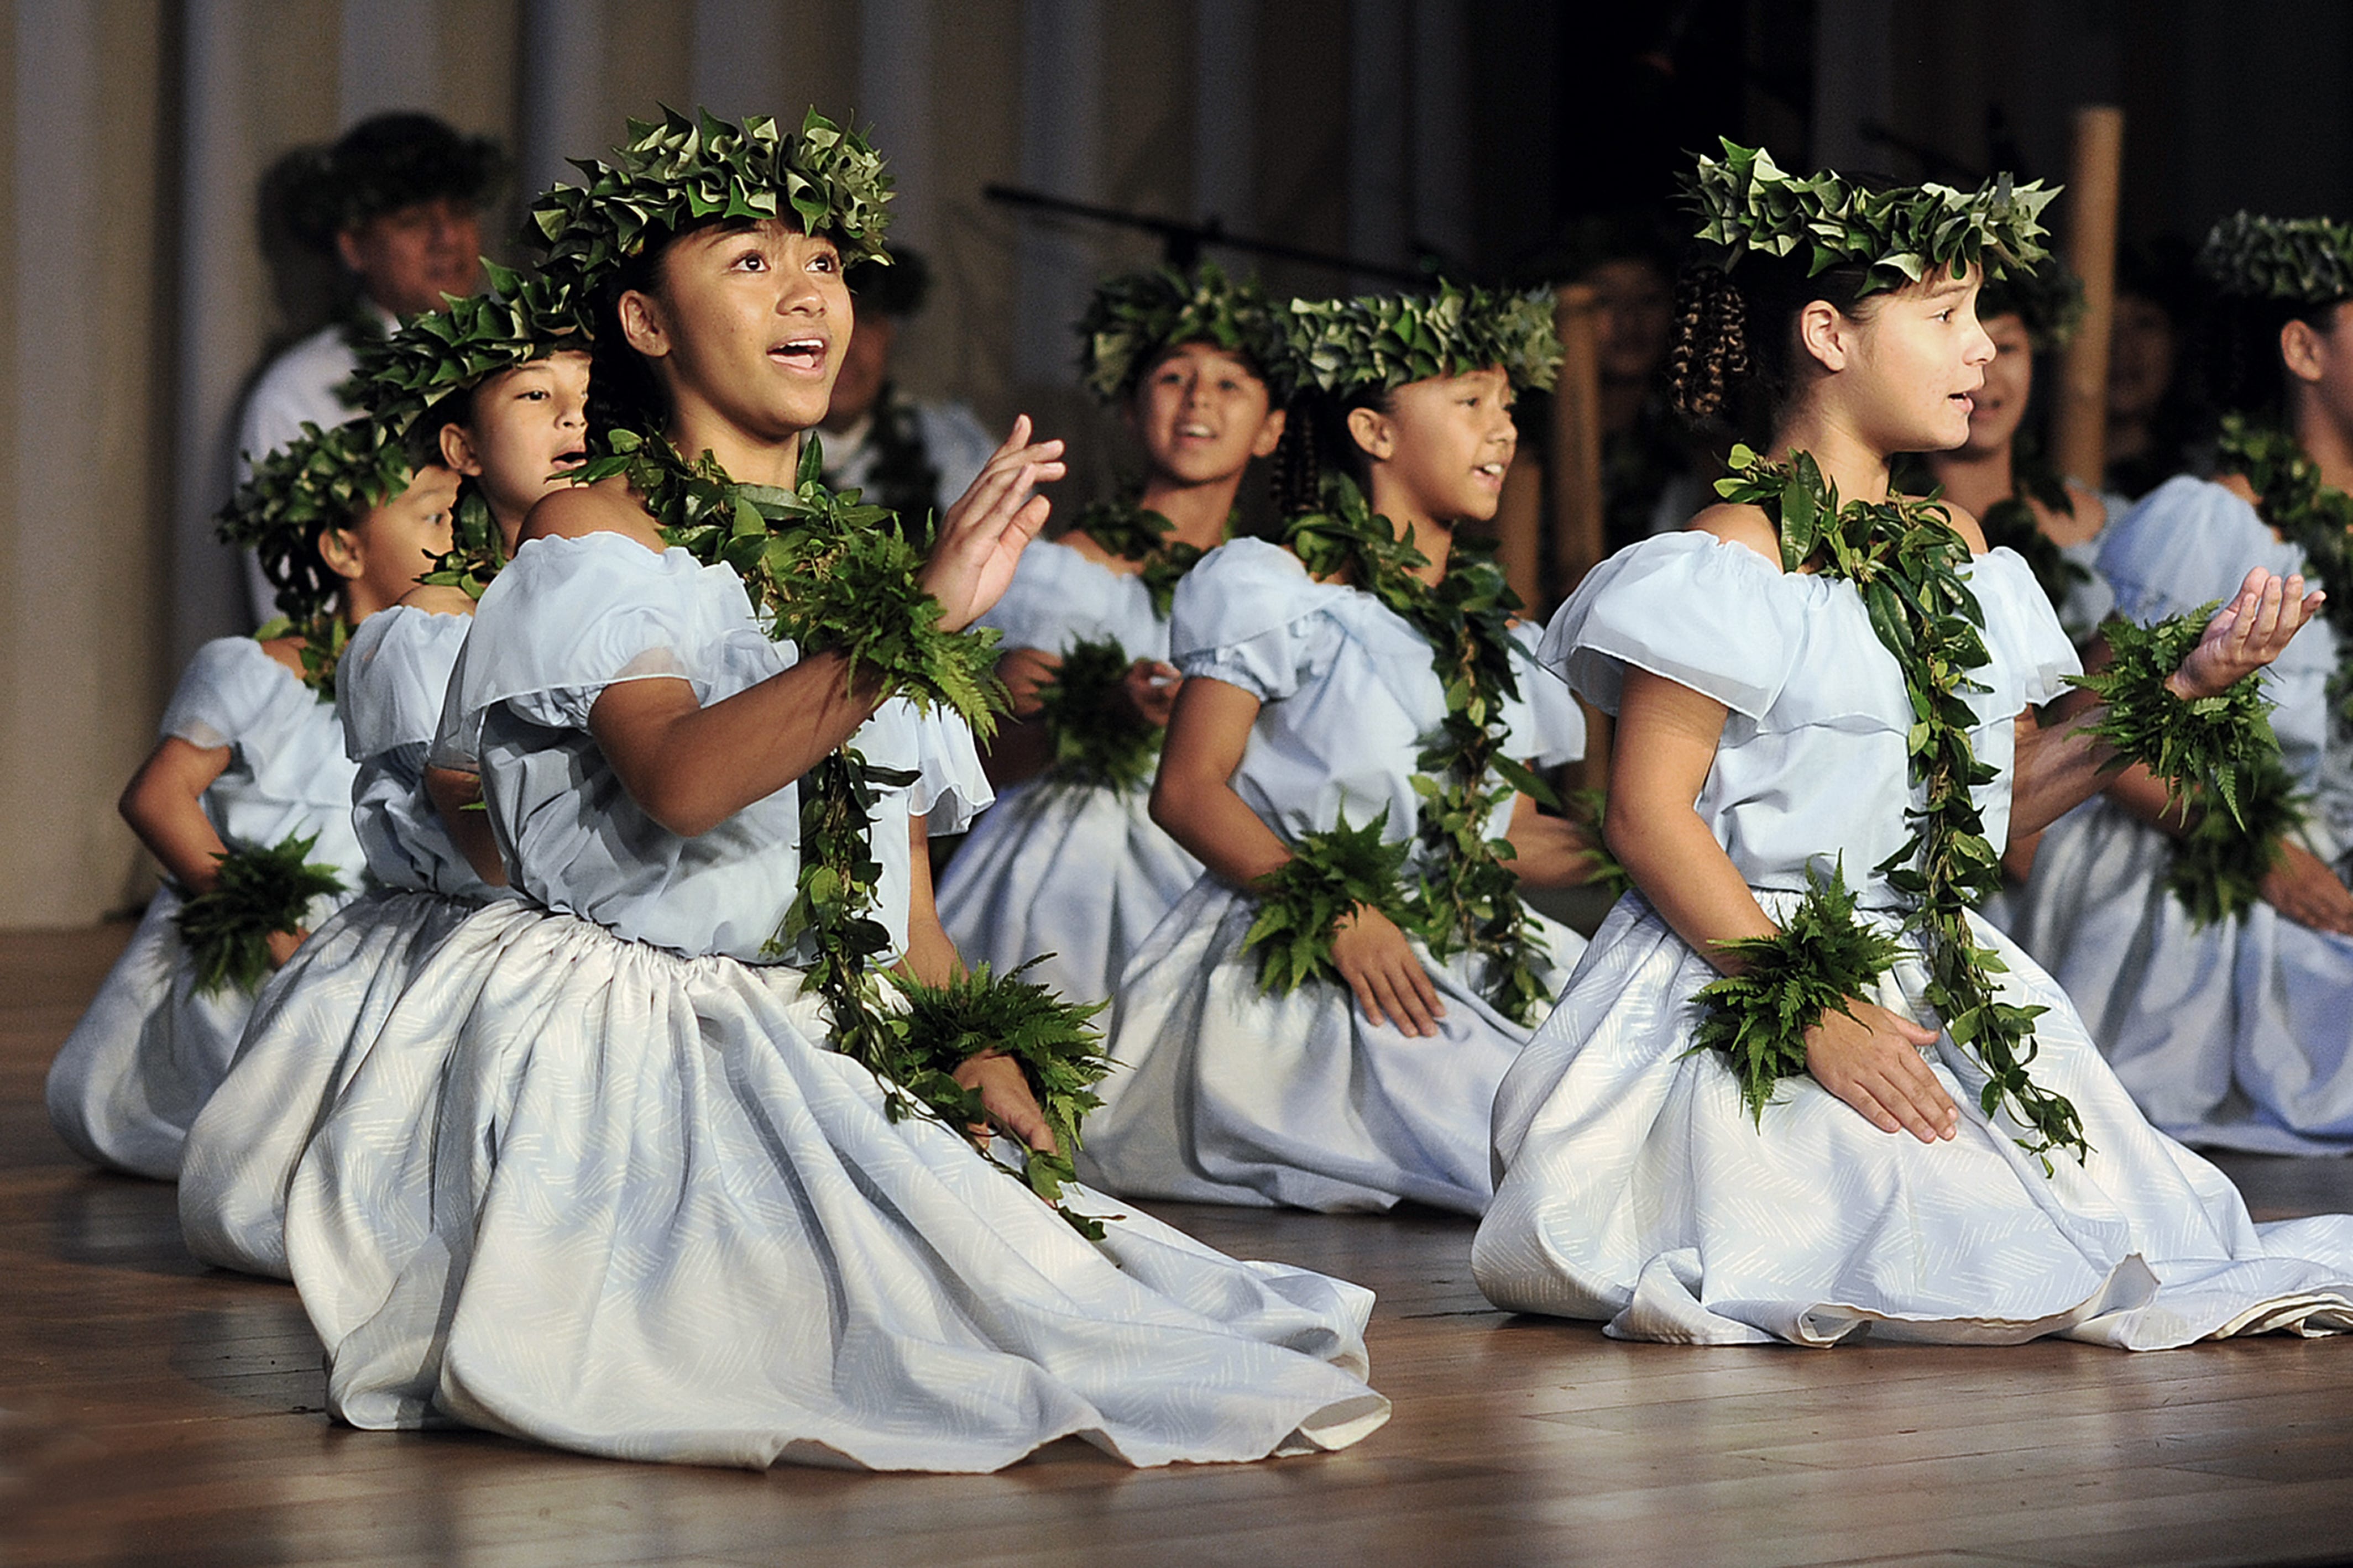 Hula was once banned in Hawaii, this competition fosters the next generation of dancers